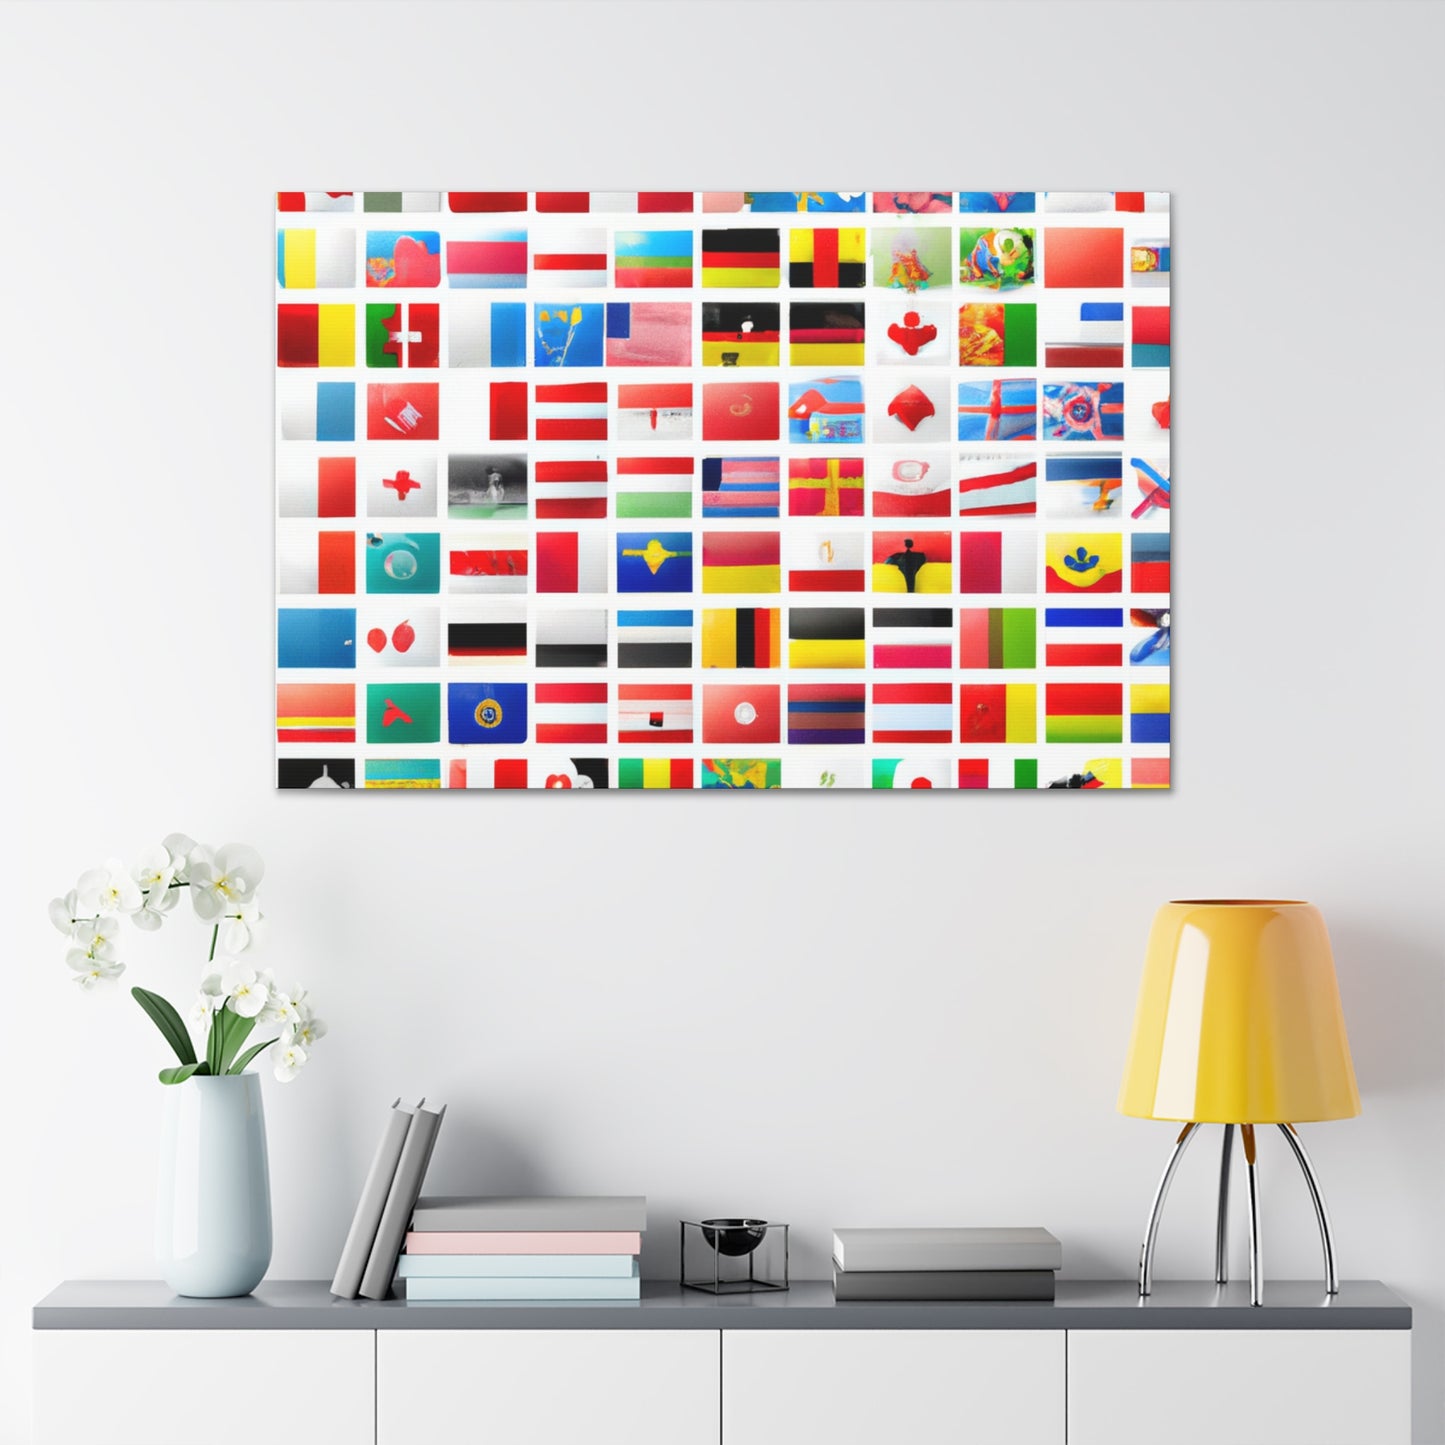 William G. Spear (1845-1929) - Flags Of The World Canvas Wall Art